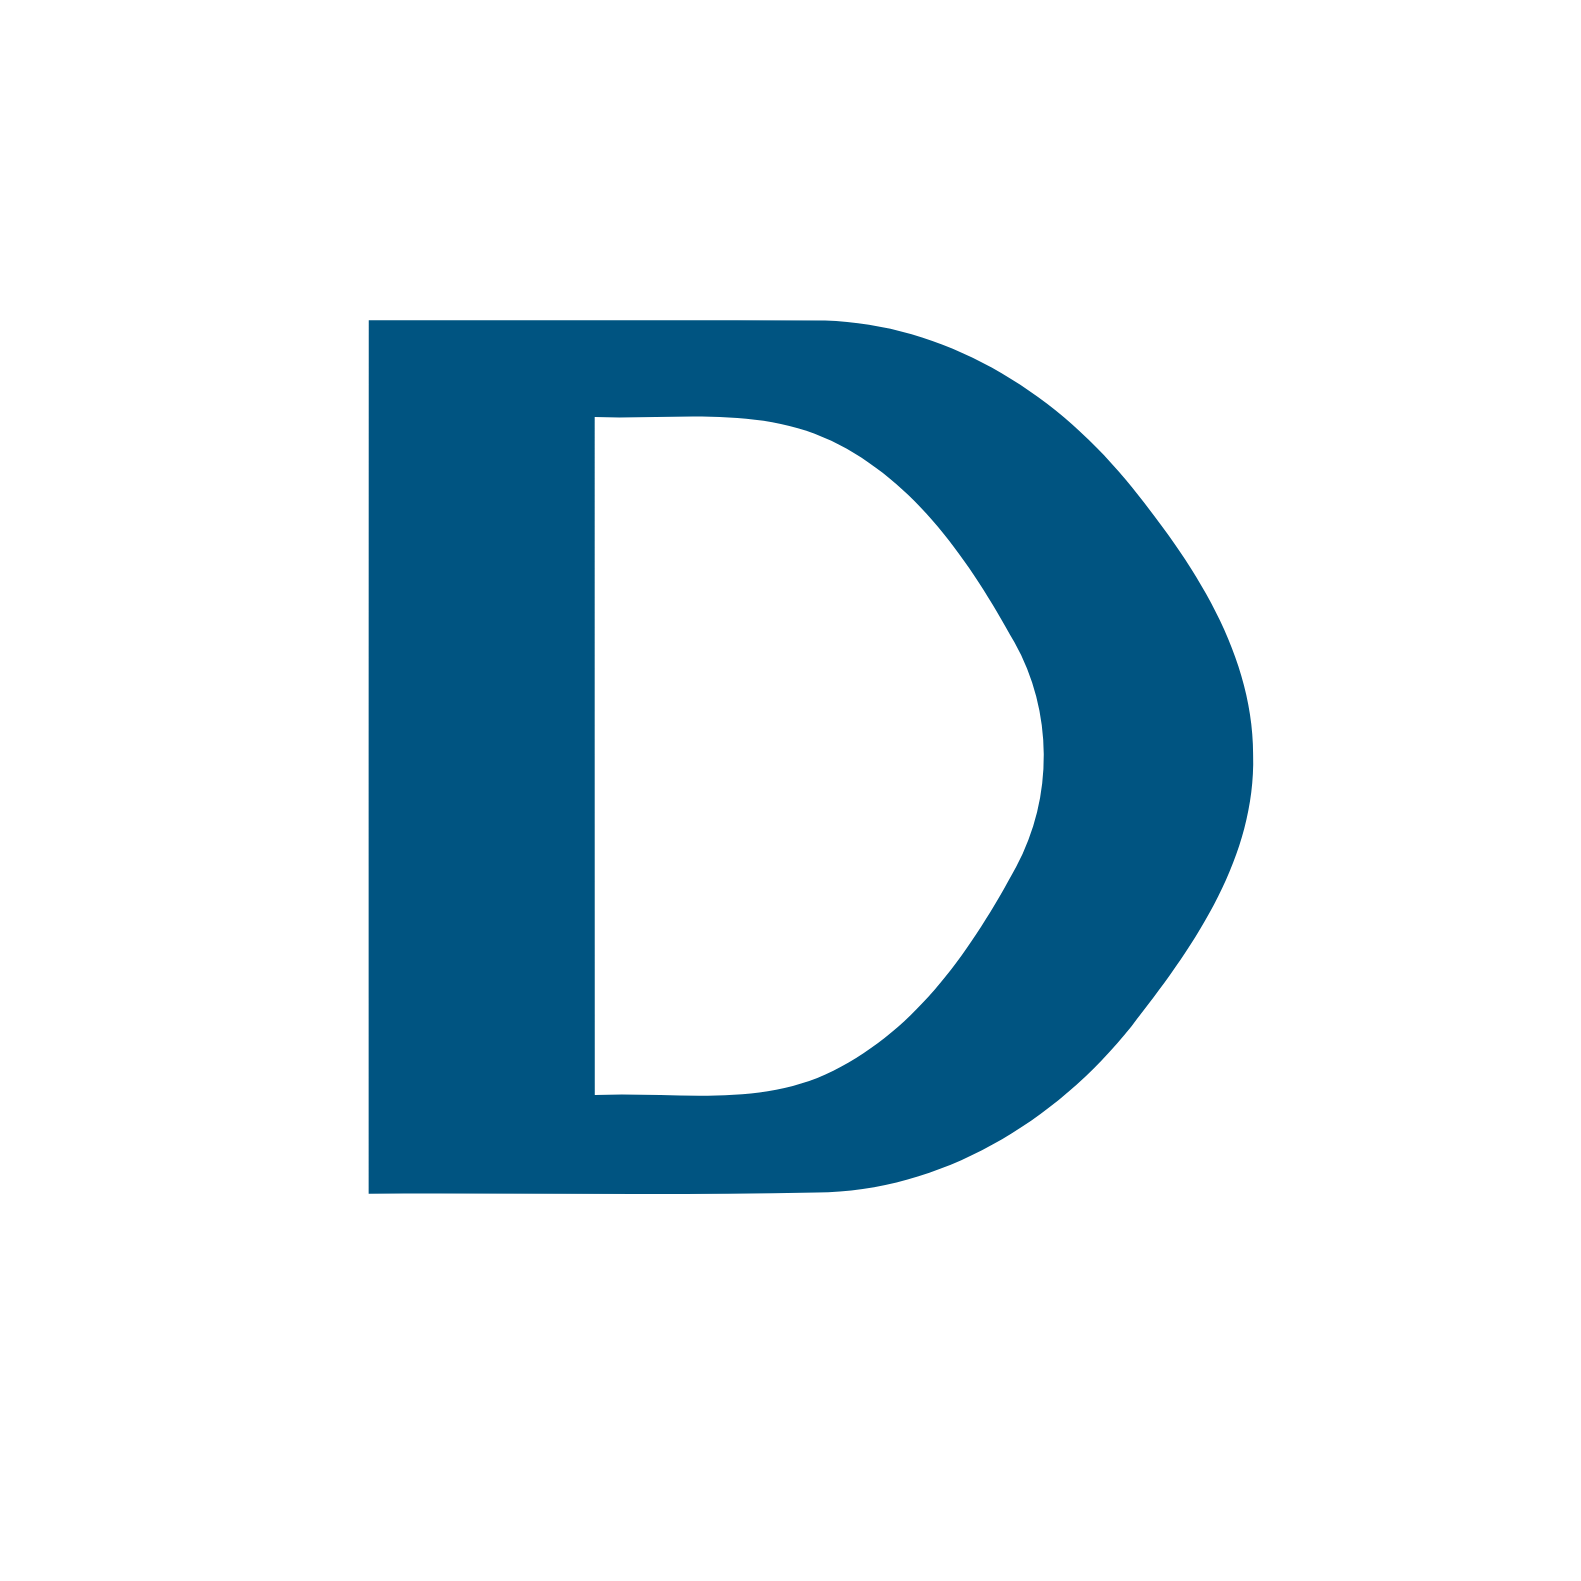 Dexerials Corporation logo in transparent PNG and vectorized SVG formats